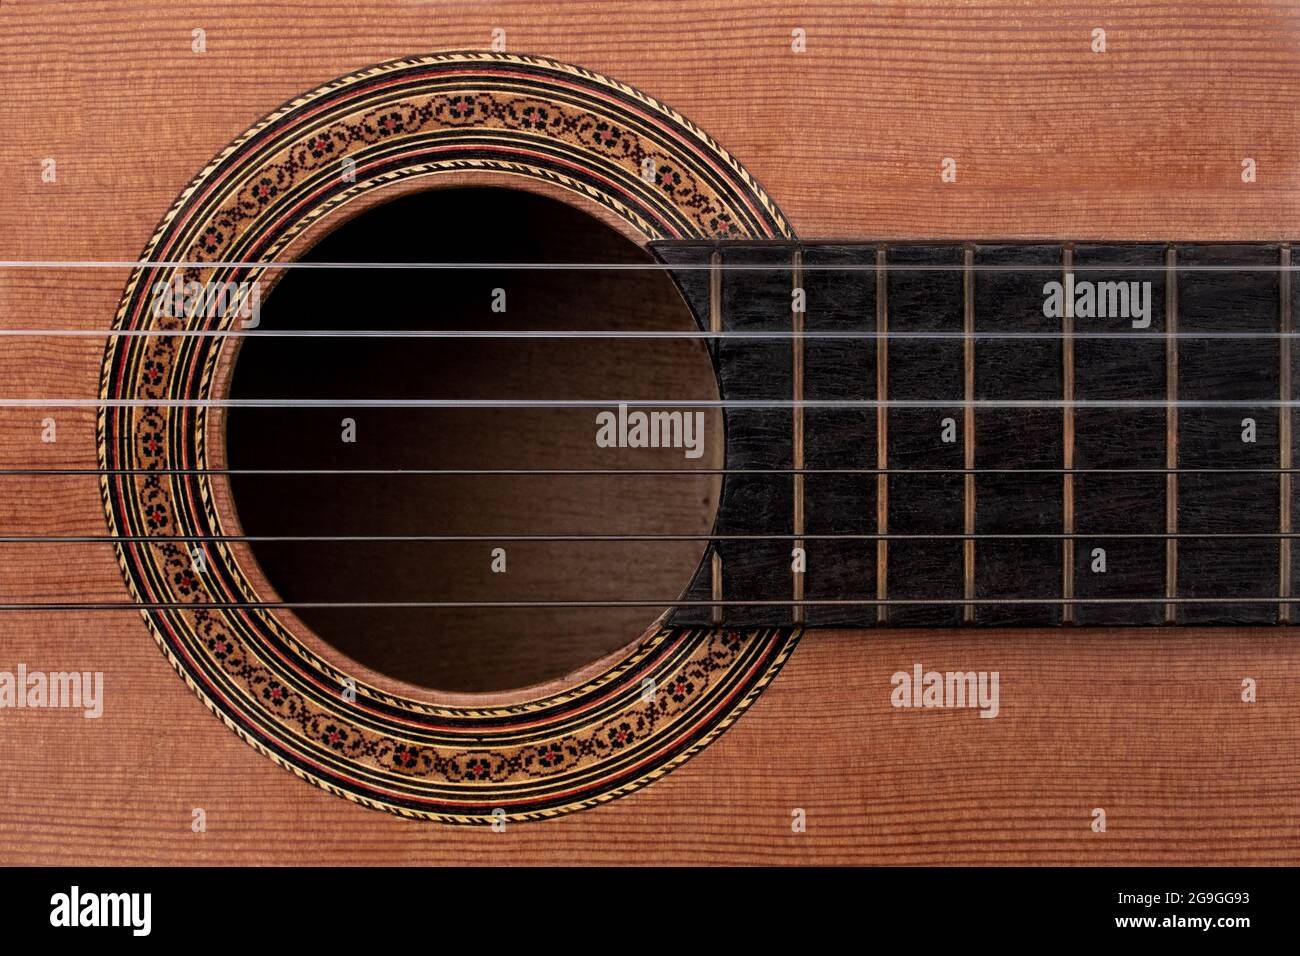 Close-up of old acoustic guitar showing detail of decorative rosette decal around soundhole, strings and part of ebony fretboard. Top down view Stock Photo